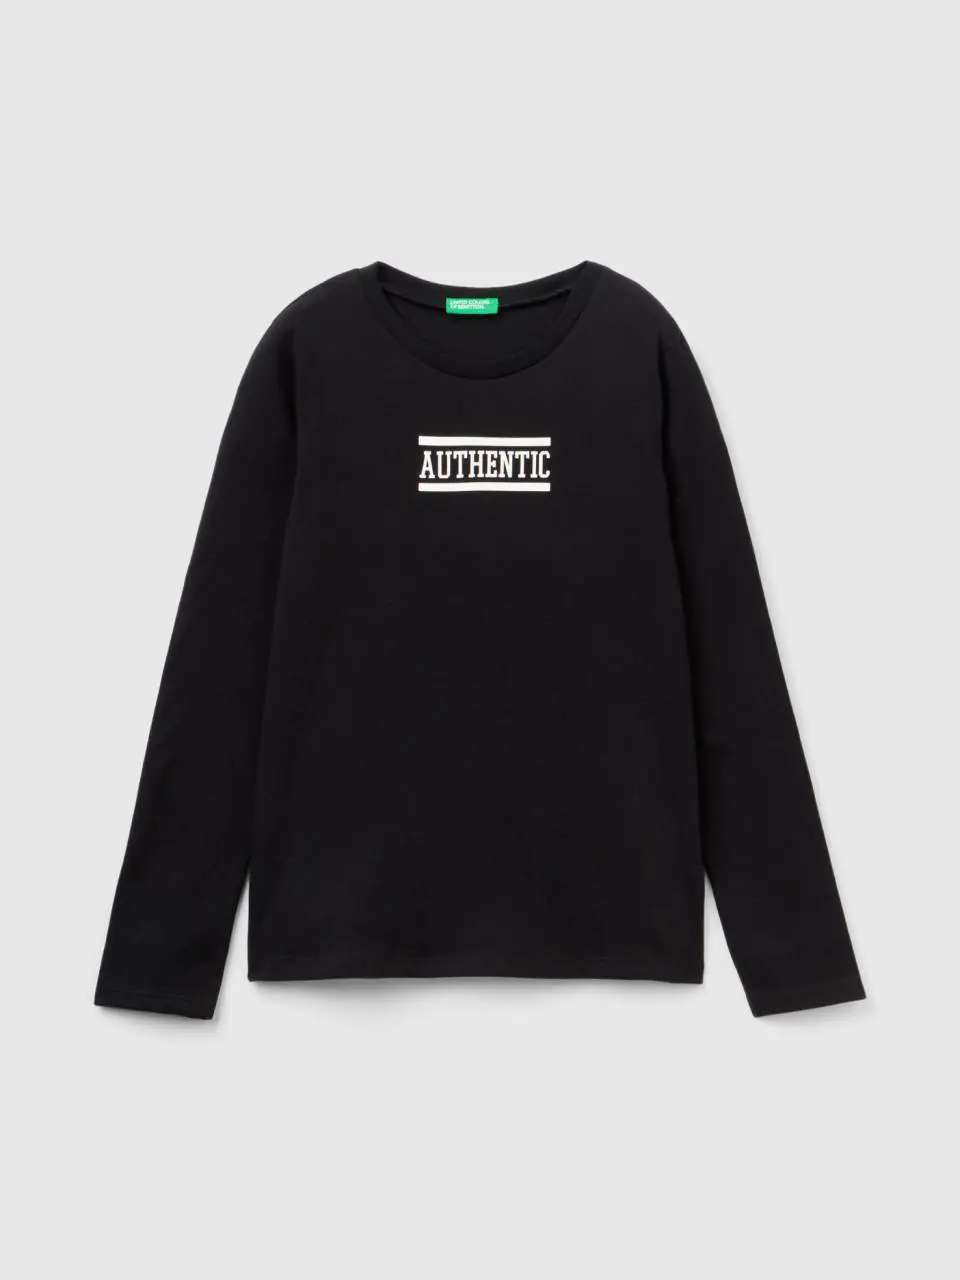 Benetton t-shirt with text print. 1